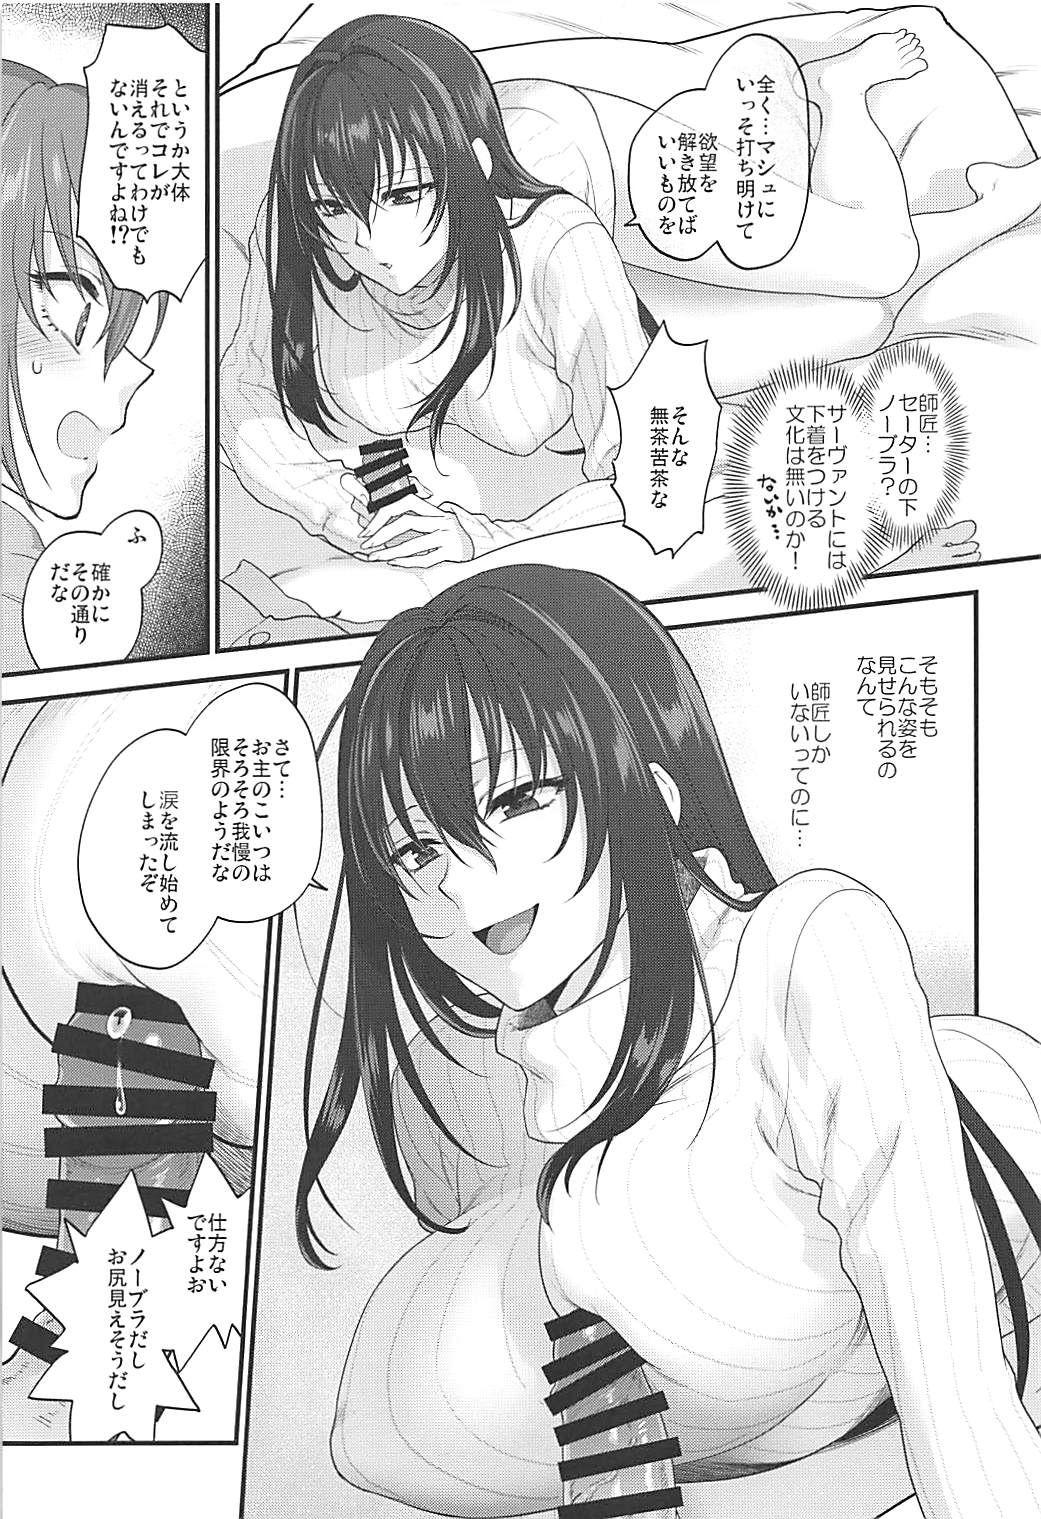 Groupsex In my room. - Fate grand order Gay Ass Fucking - Page 8